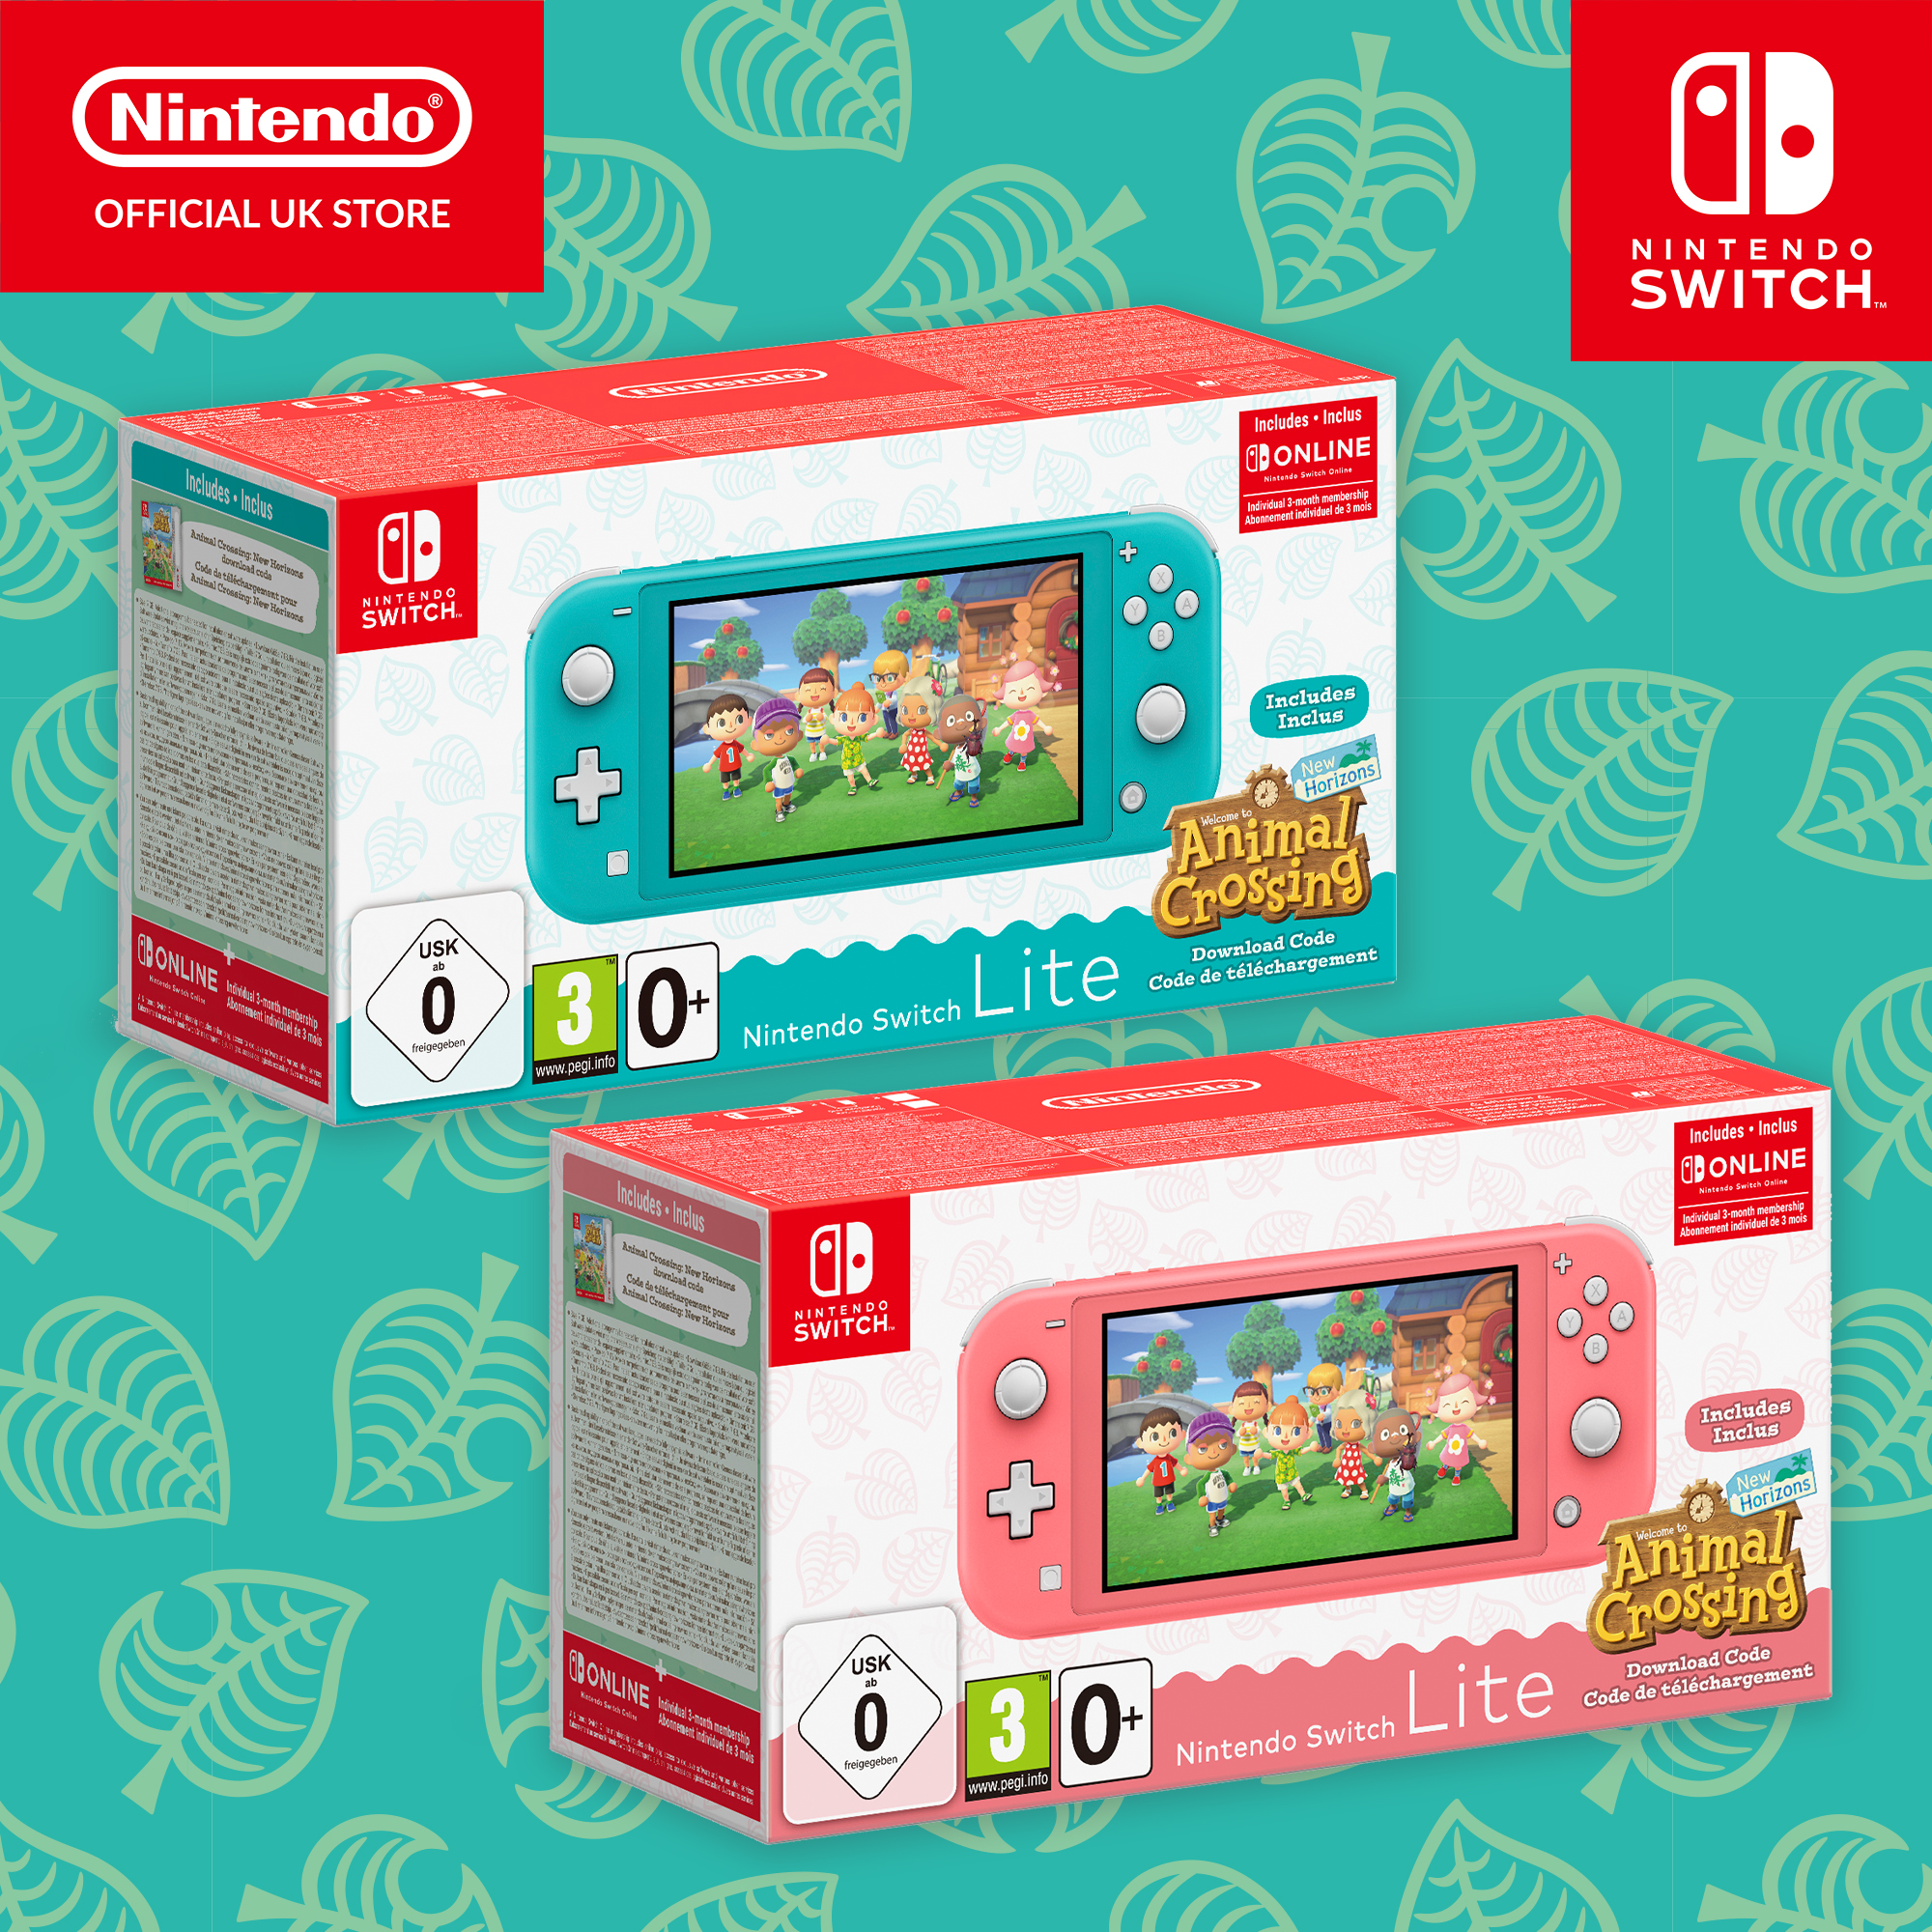 Get a Nintendo Switch Lite, Animal Crossing: New Horizons and a 3-month Nintendo Switch Online Individual Membership in one great bundle!